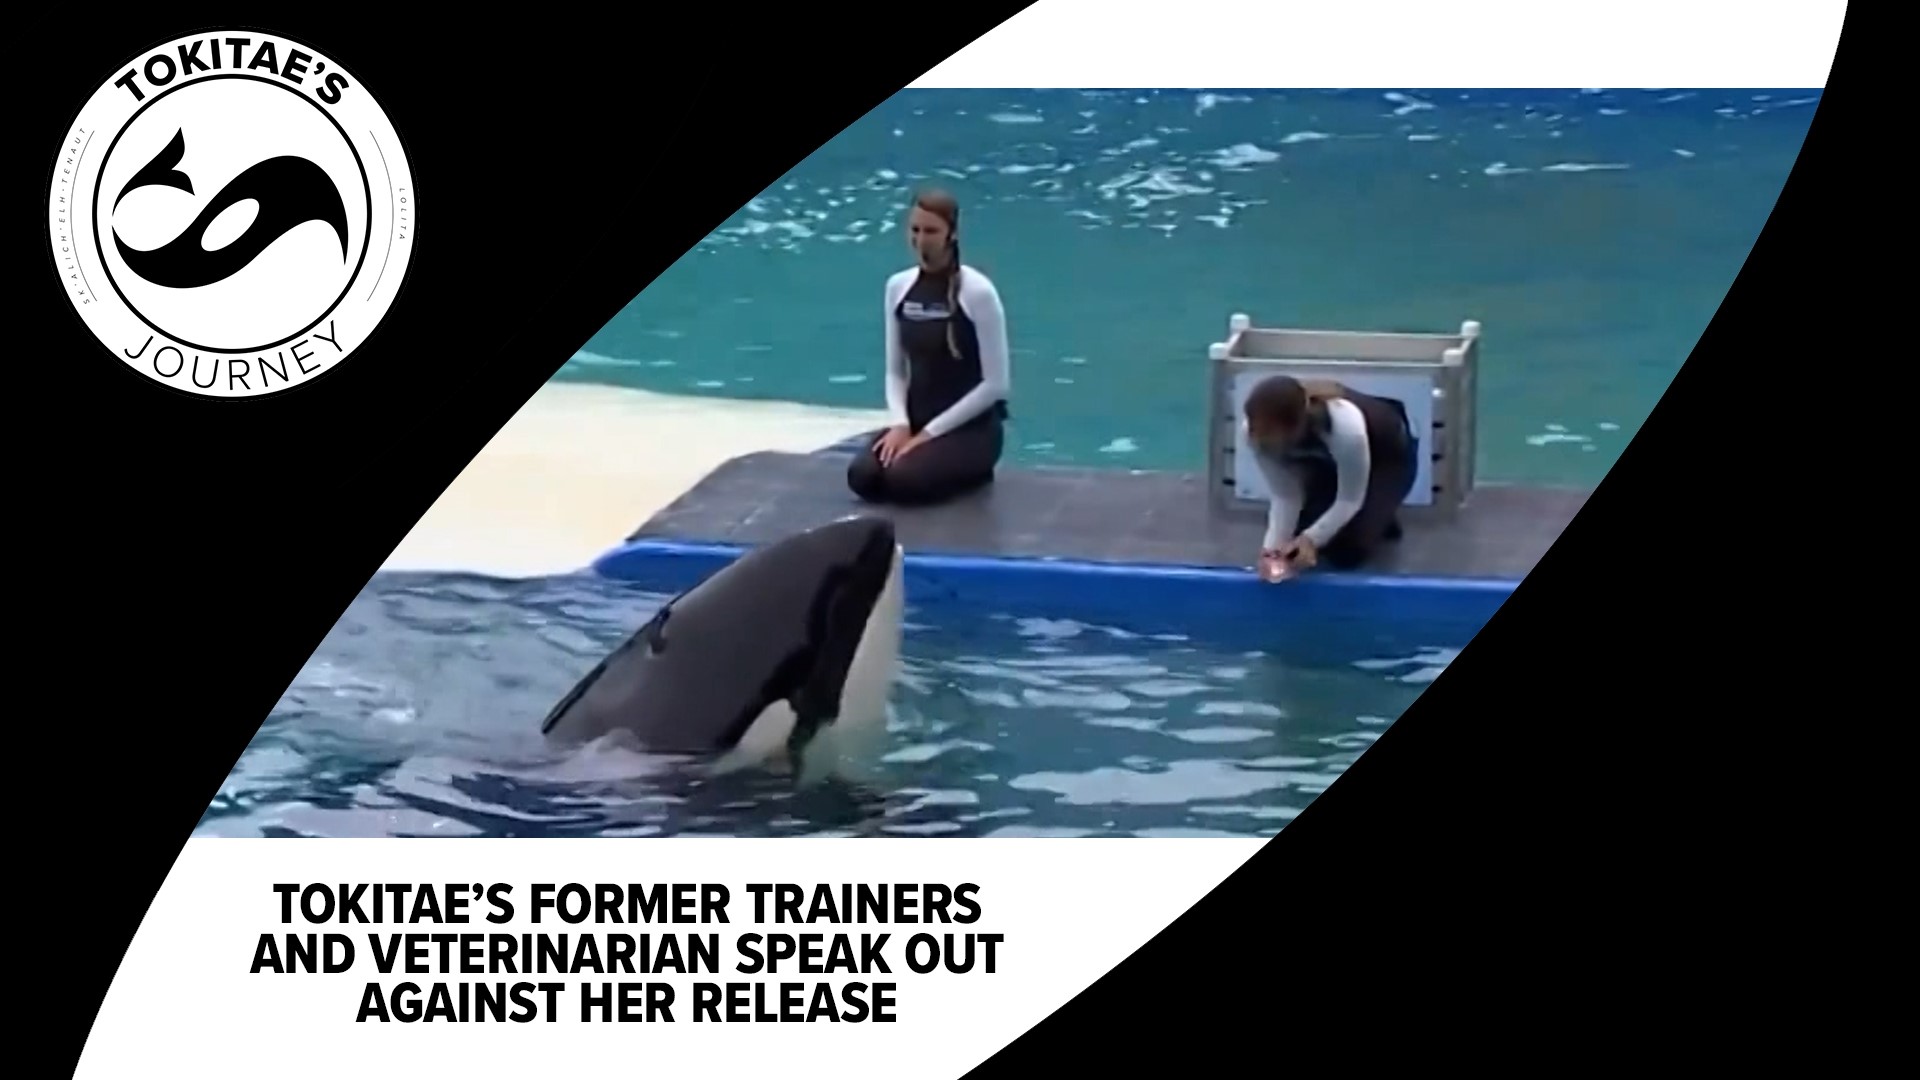 A group of former trainers and vets say they don’t believe Tokitae can survive transport at her age, and even if she does, her release could endanger her own family.